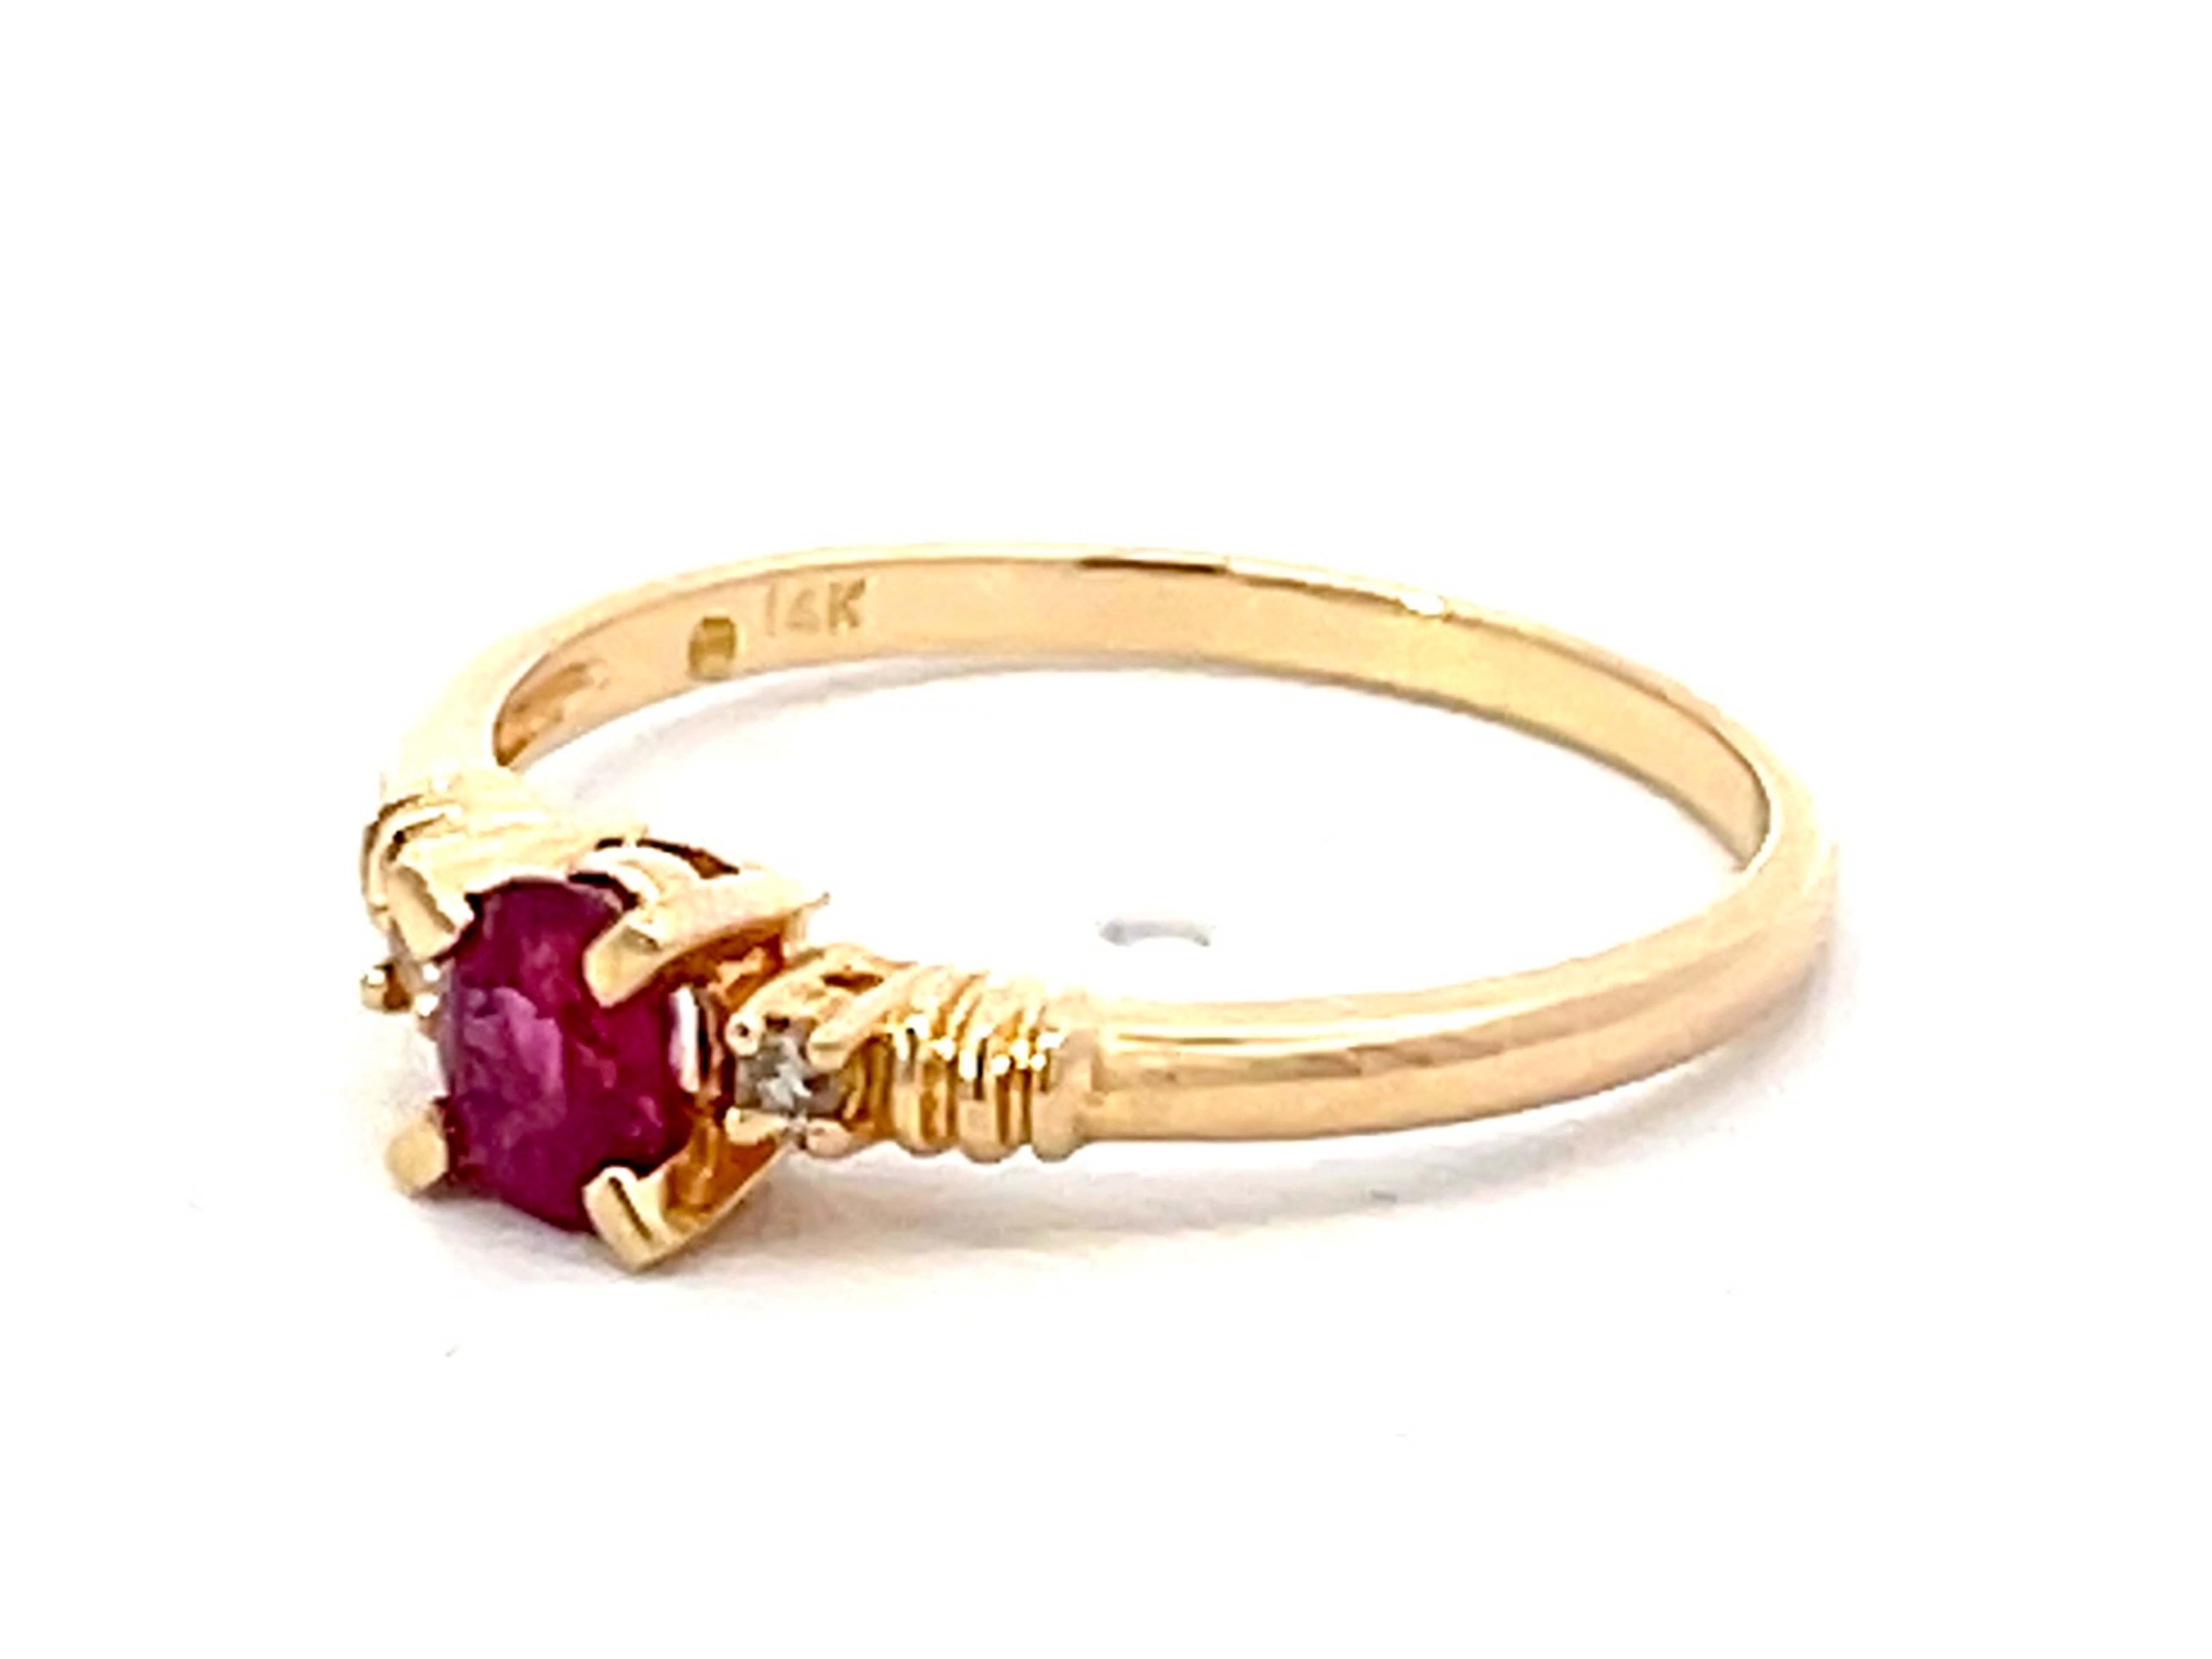 Brilliant Cut Oval Ruby Diamond Ring in 14k Yellow Gold For Sale